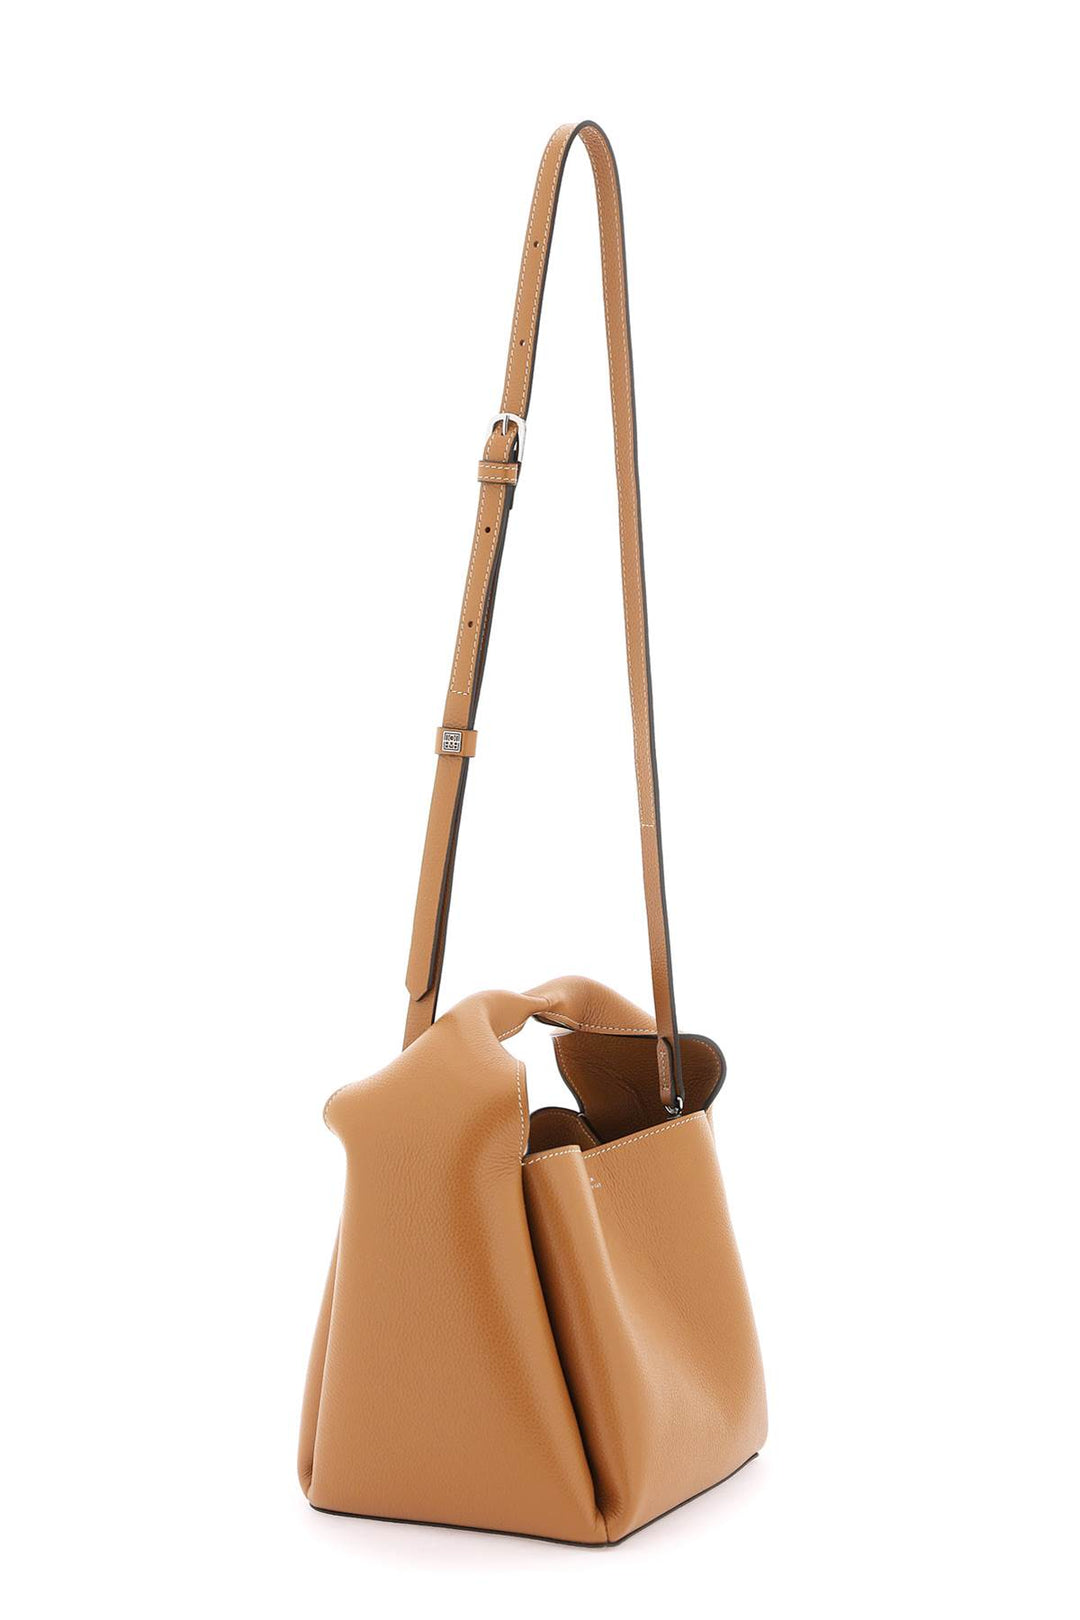 Toteme Hammered Leather Bucket Bag   Brown